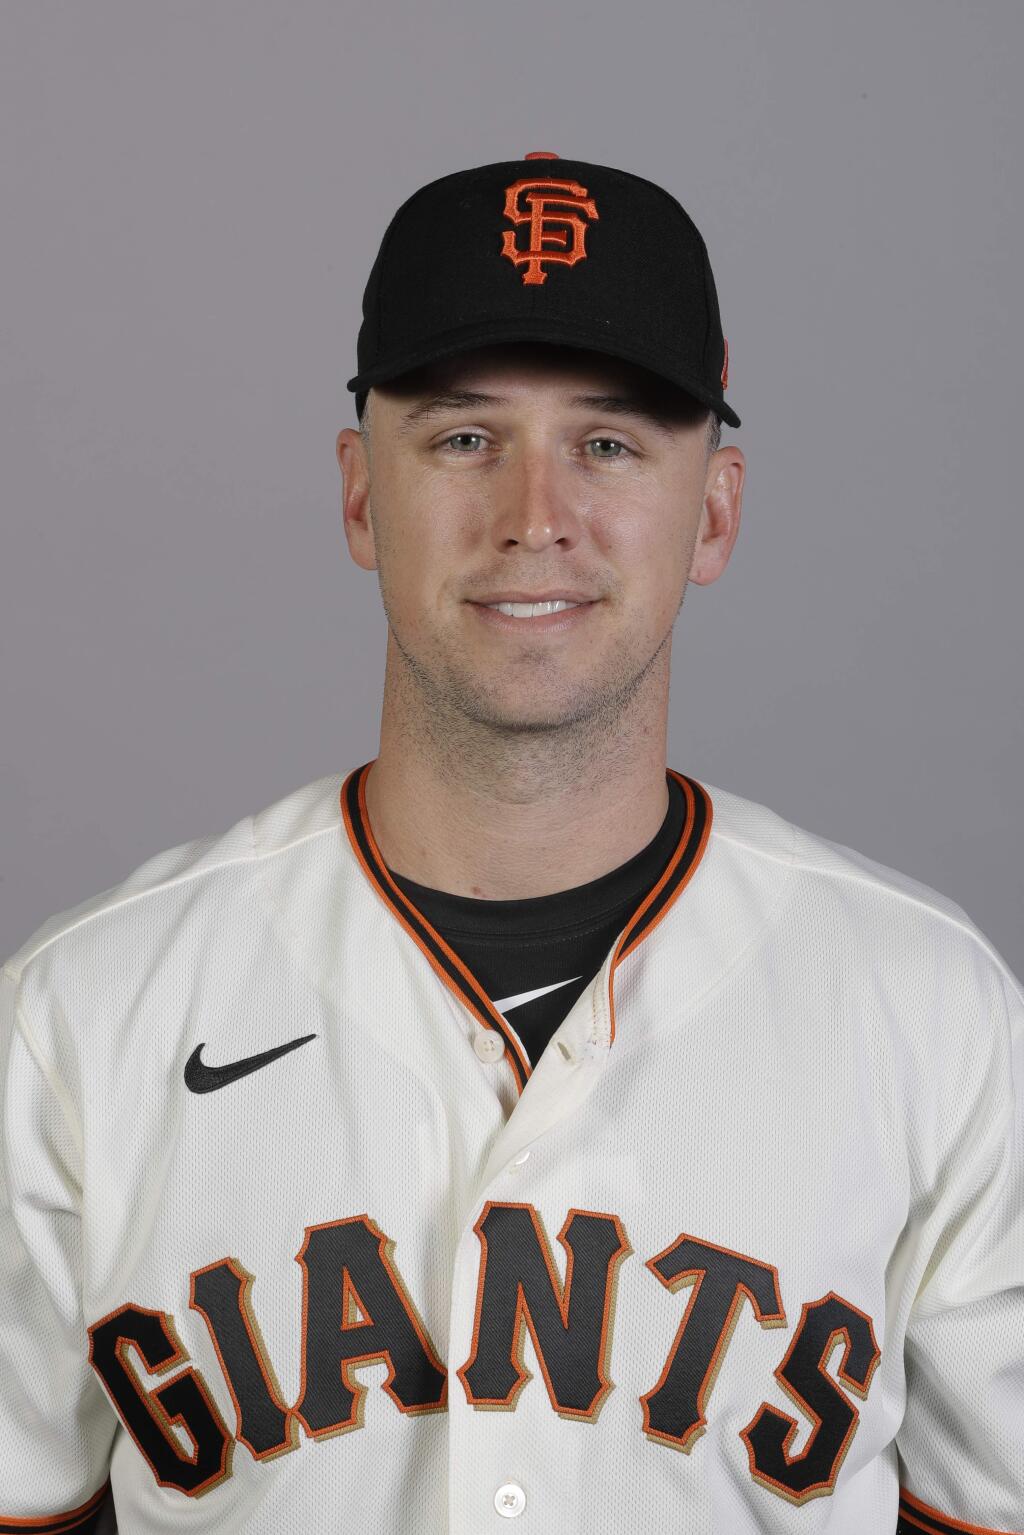 A 2020 photo of Buster Posey of the San Francisco Giants. (AP Photo/Darron Cummings)